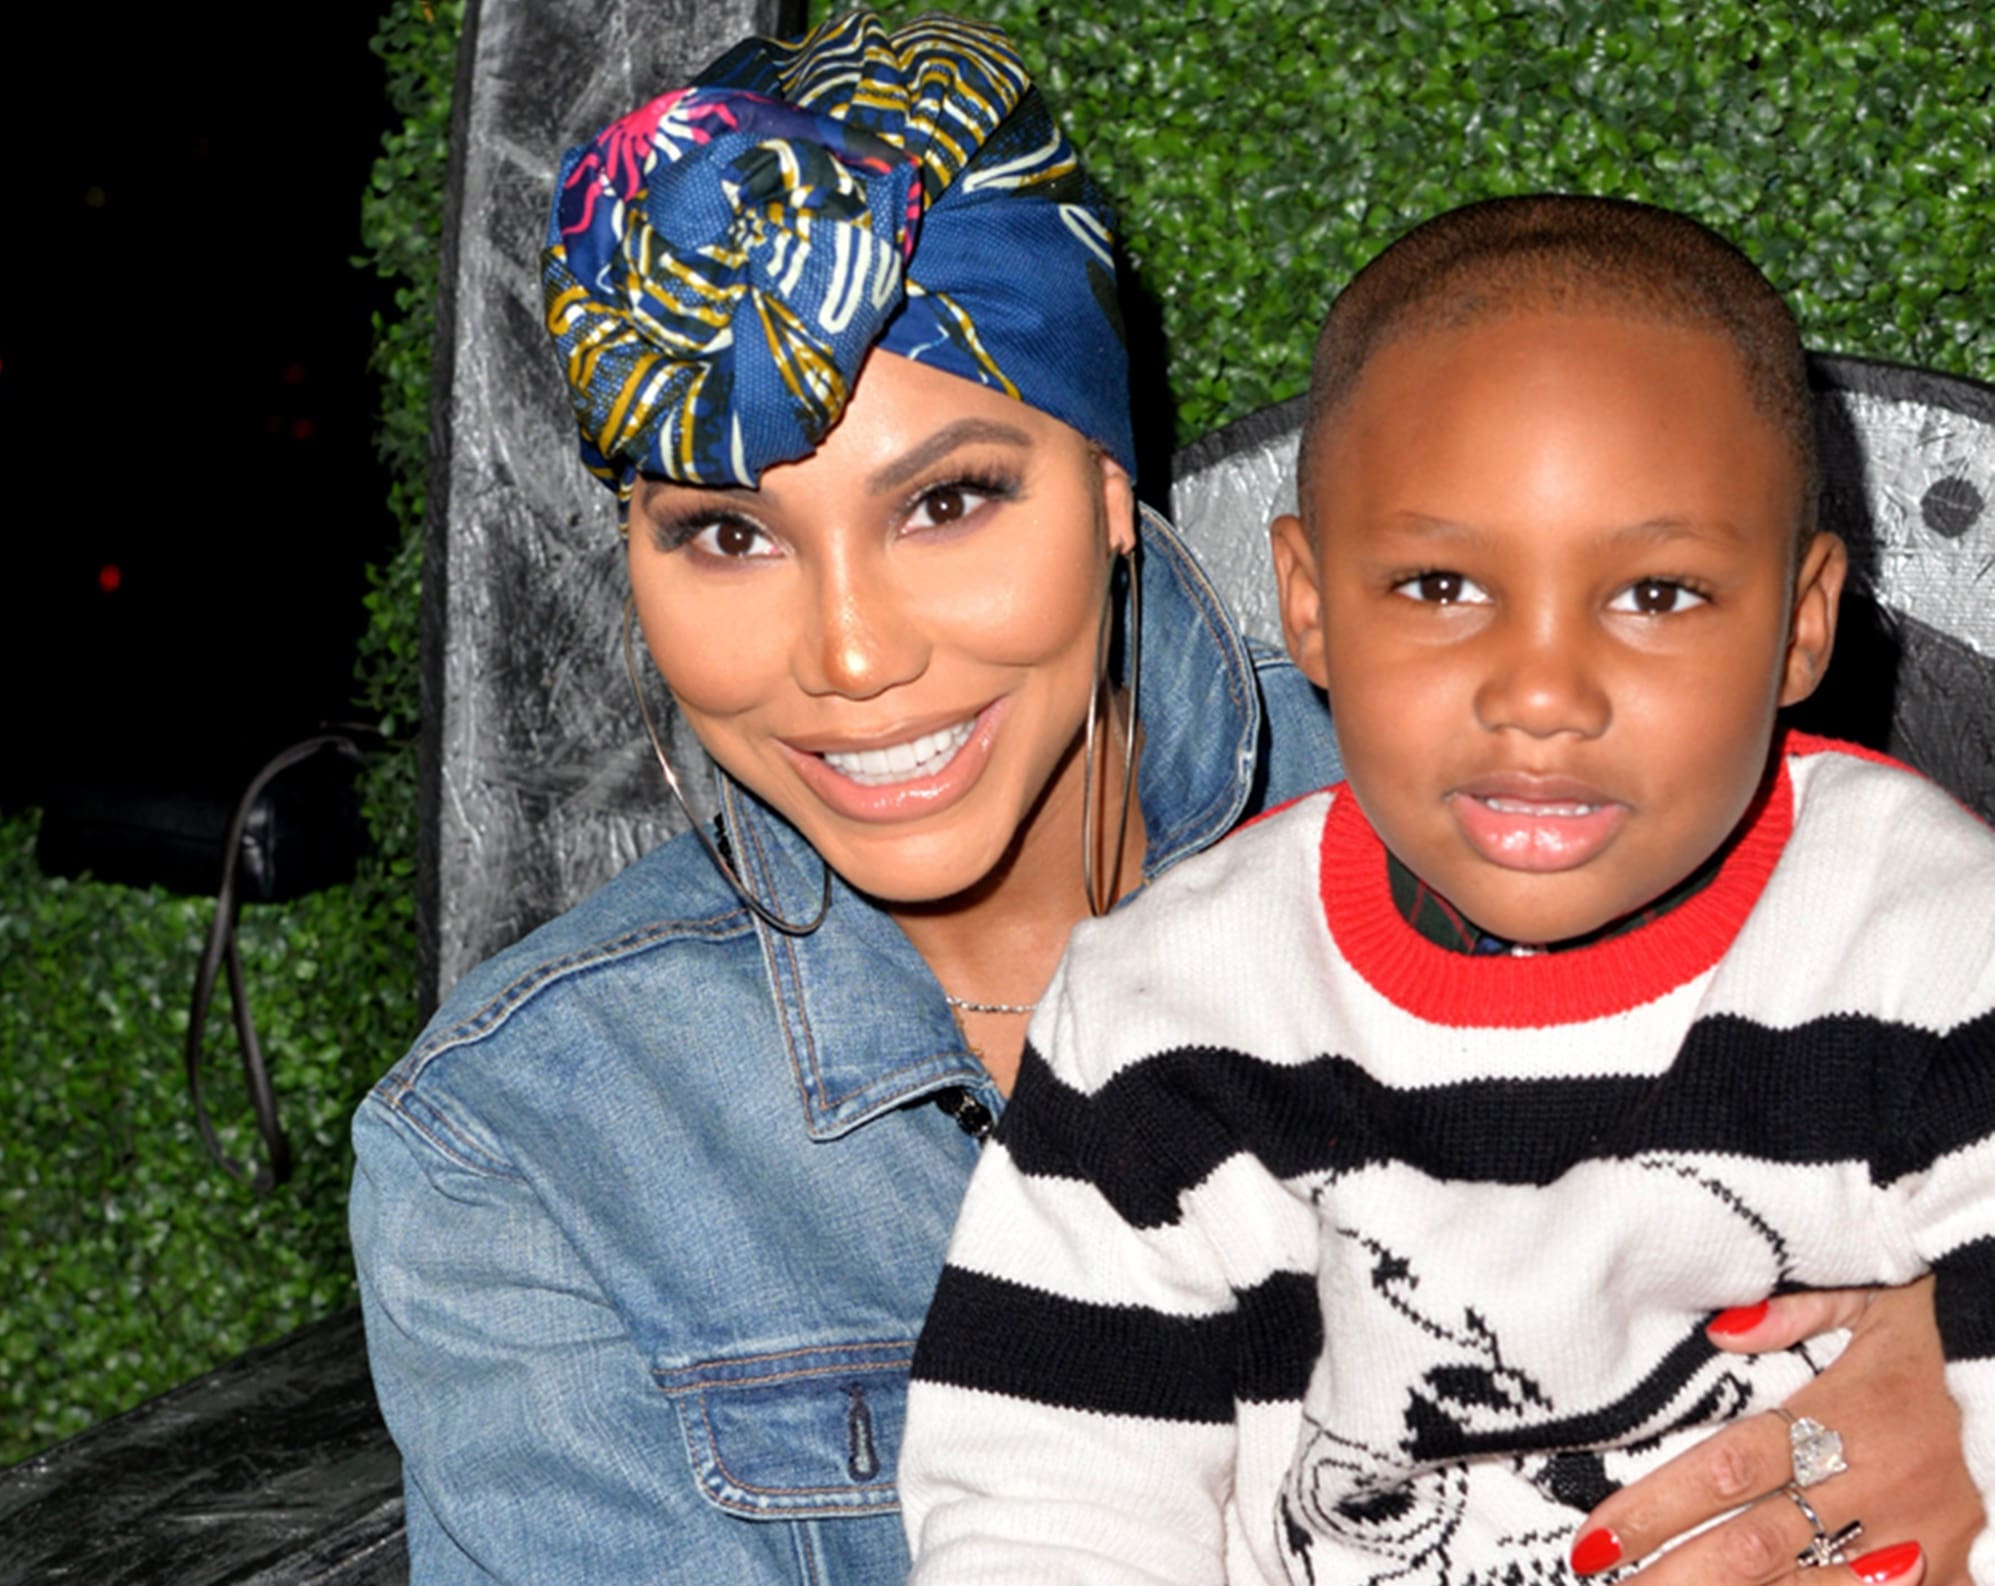 Tamar Braxton Has The Best Time While Dancing With Her Son, Logan Herbert - Check Out The Funny Video